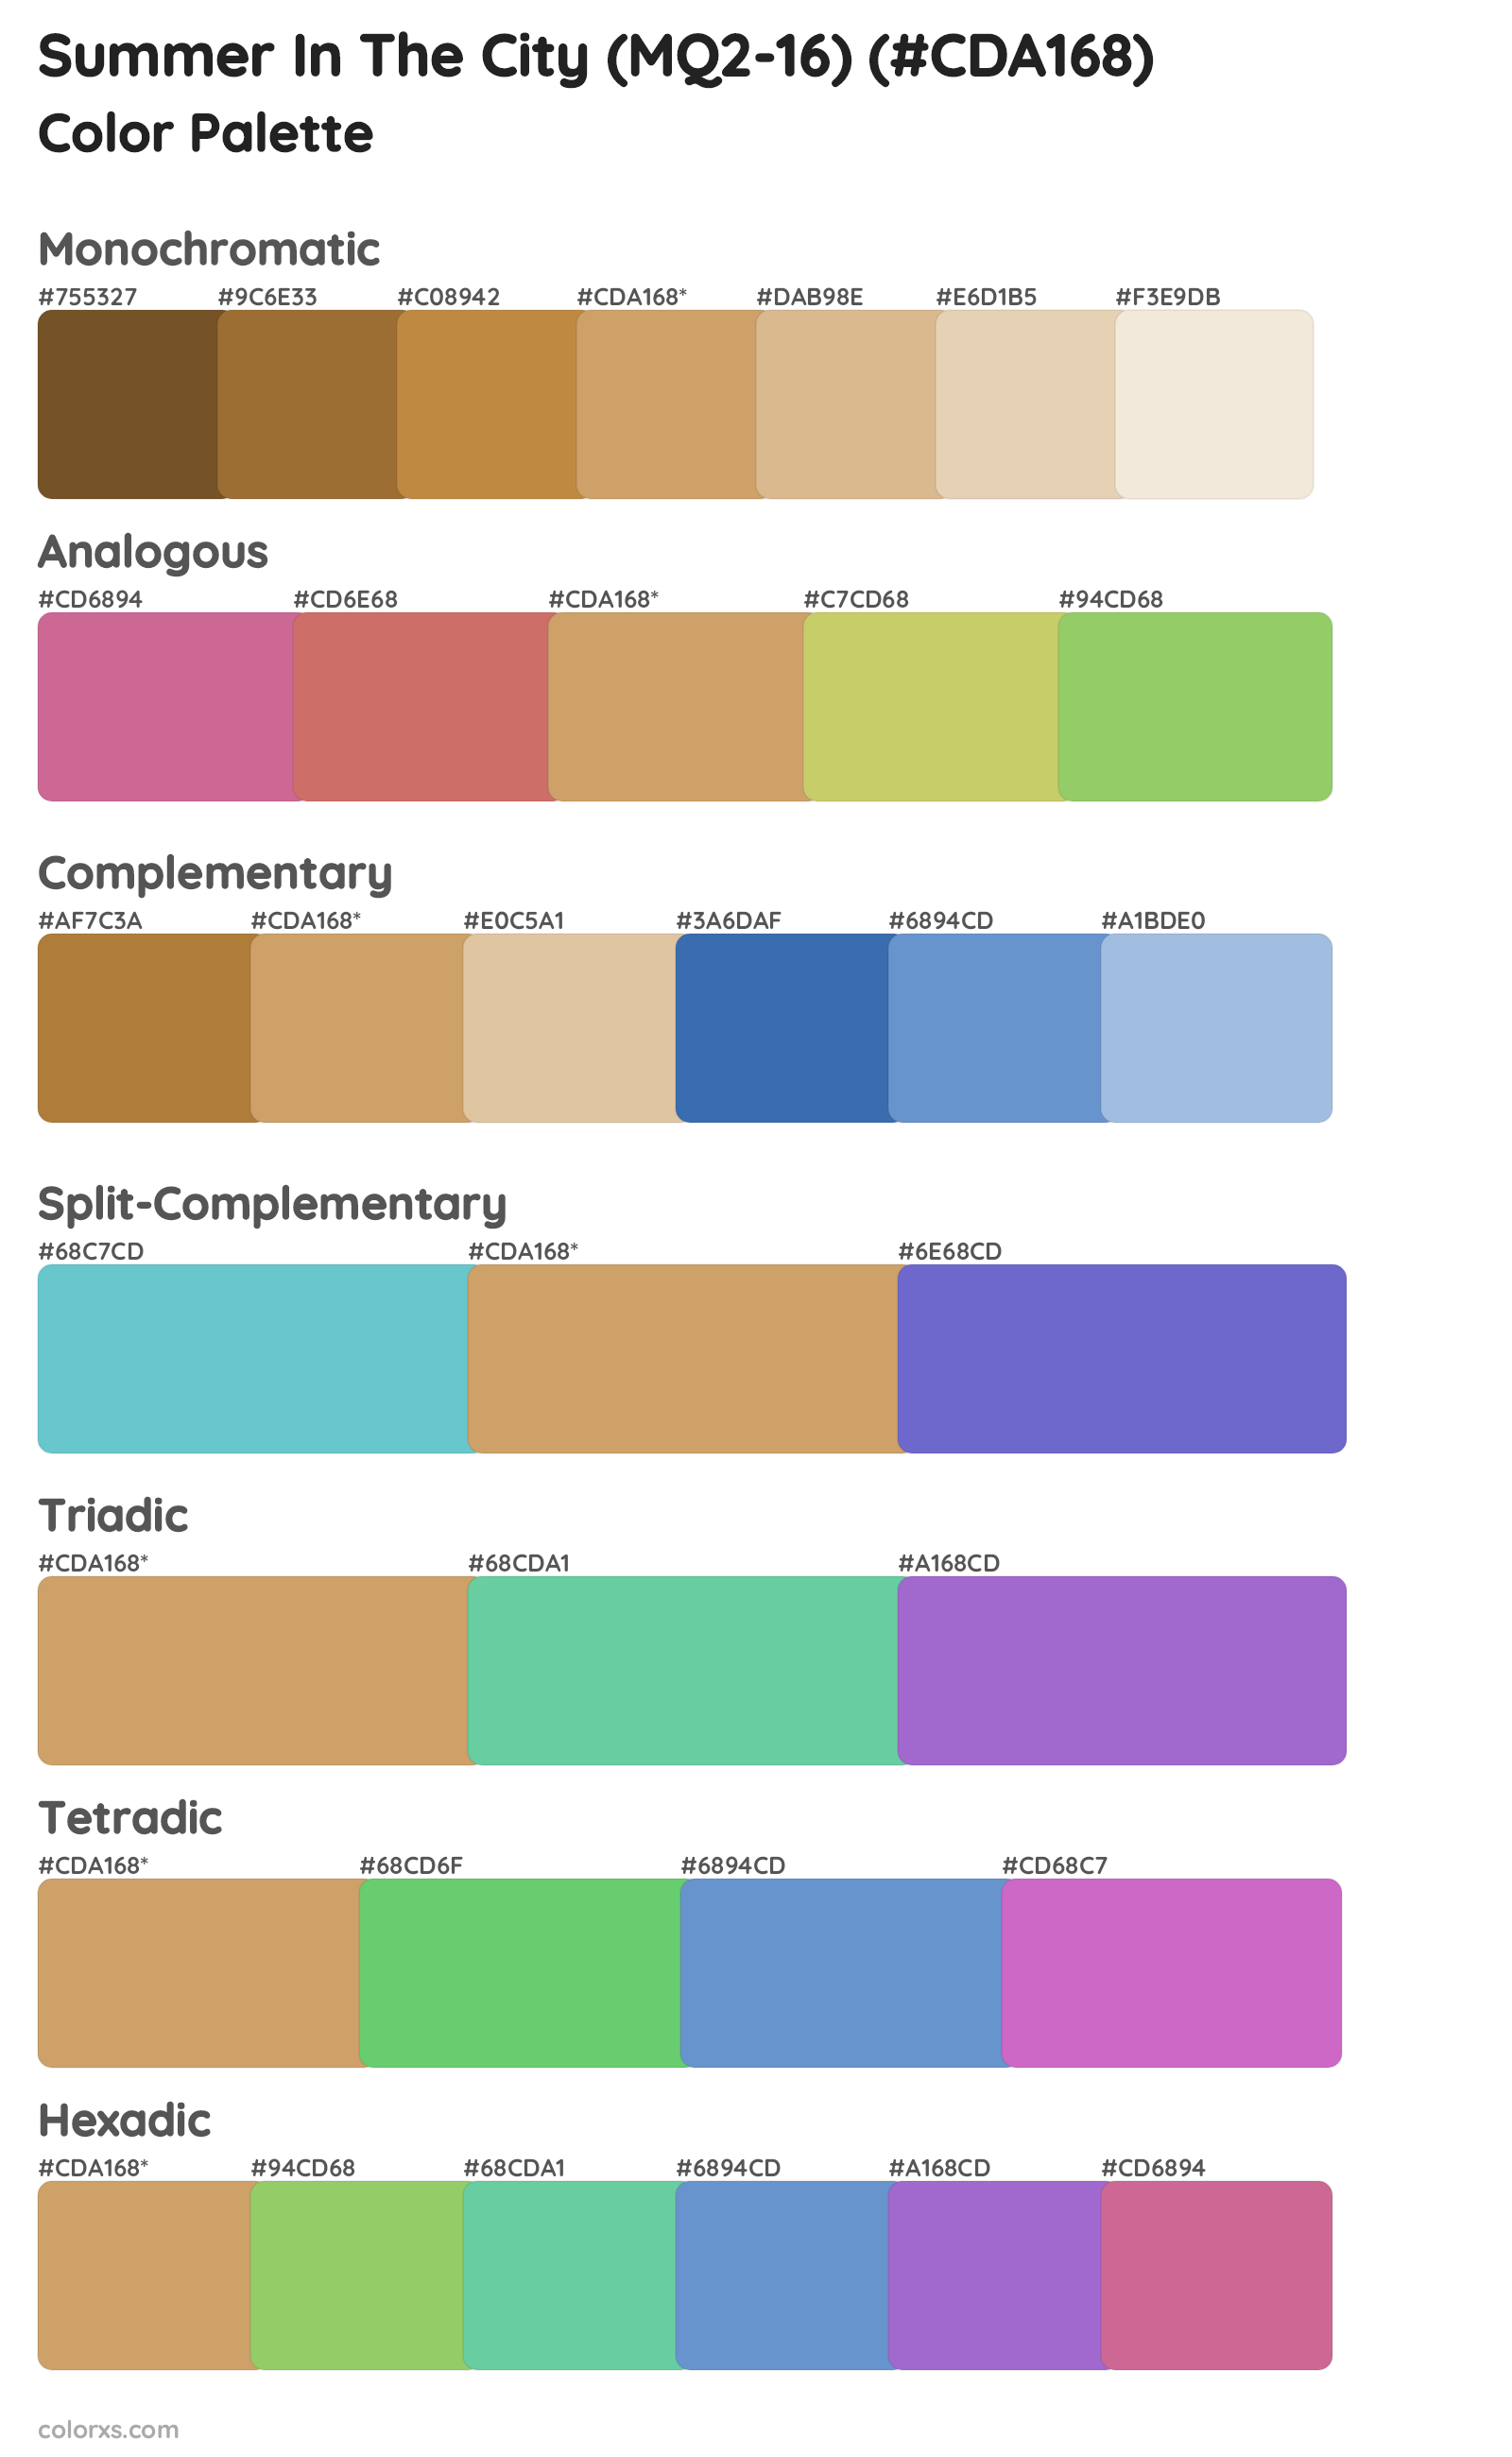 Summer In The City (MQ2-16) Color Scheme Palettes